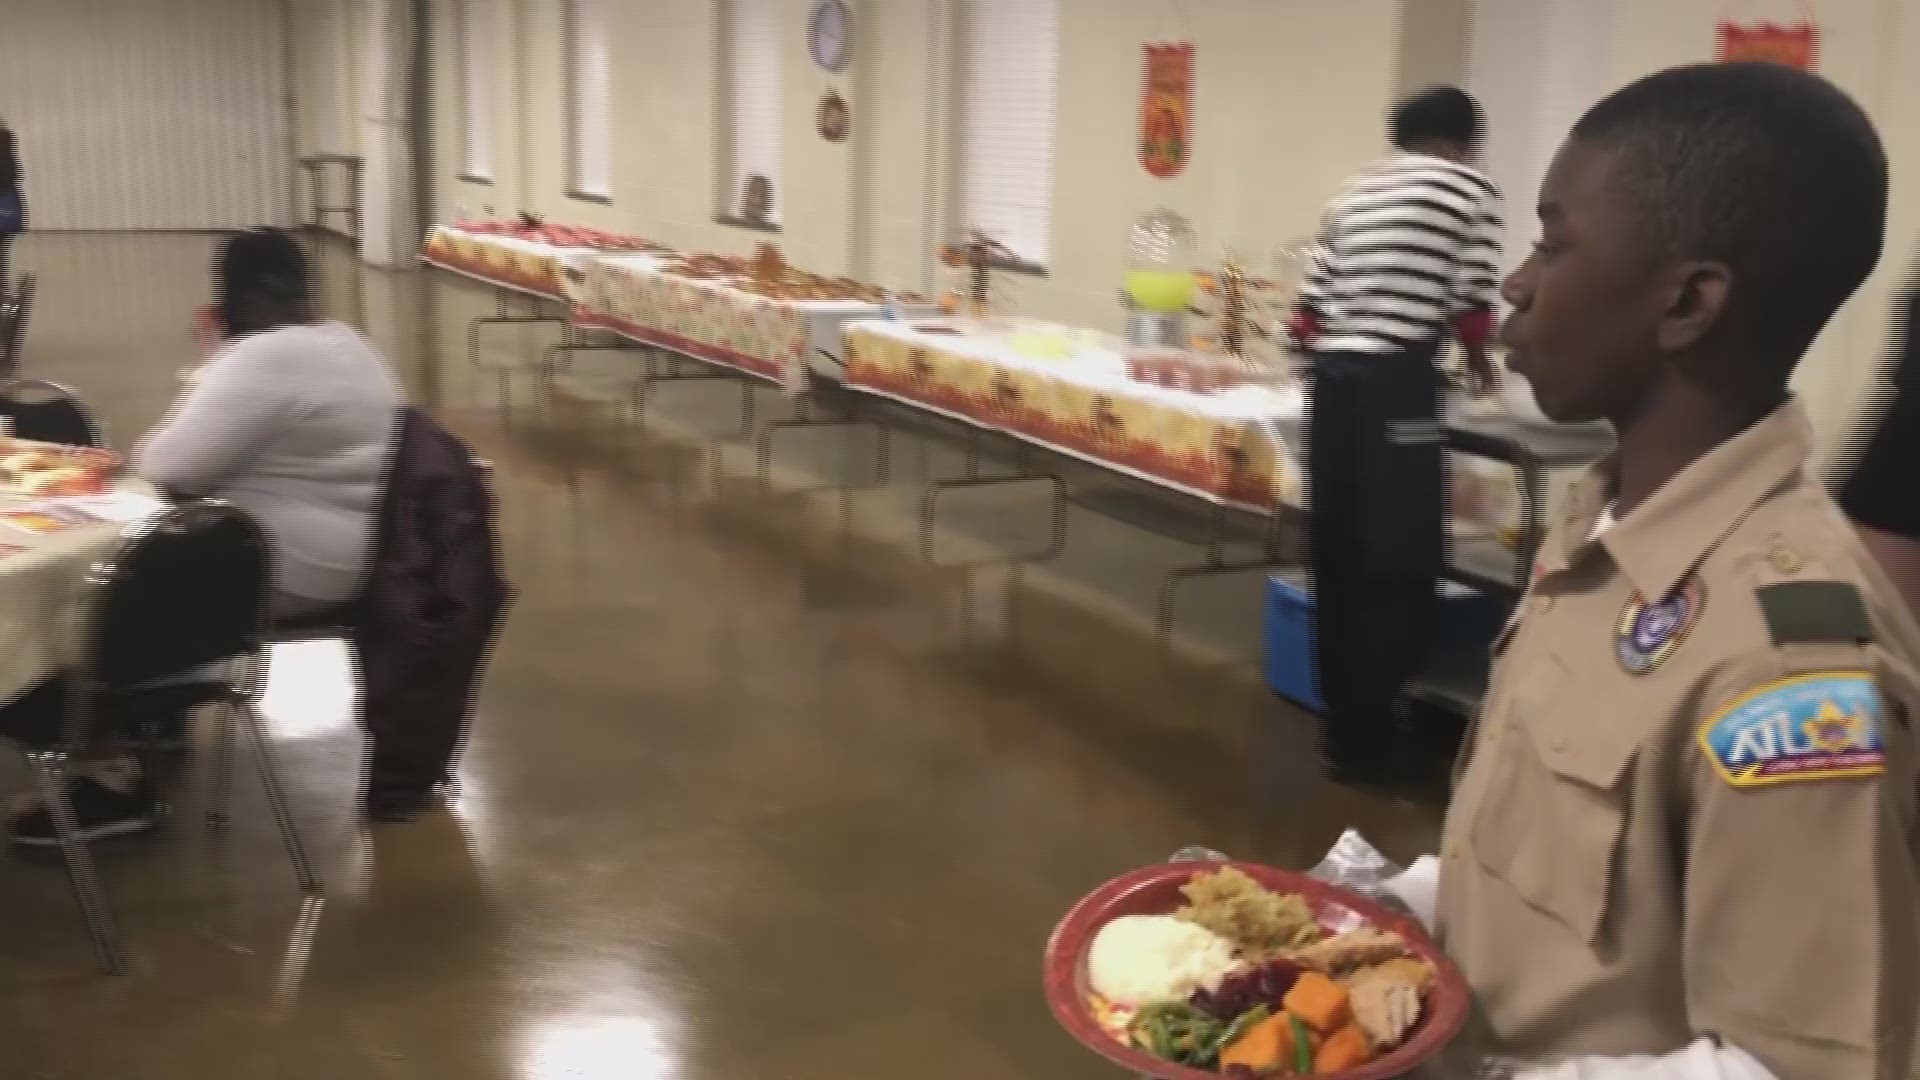 As part of its annual tradition, the church and first responders provide meals to those in need